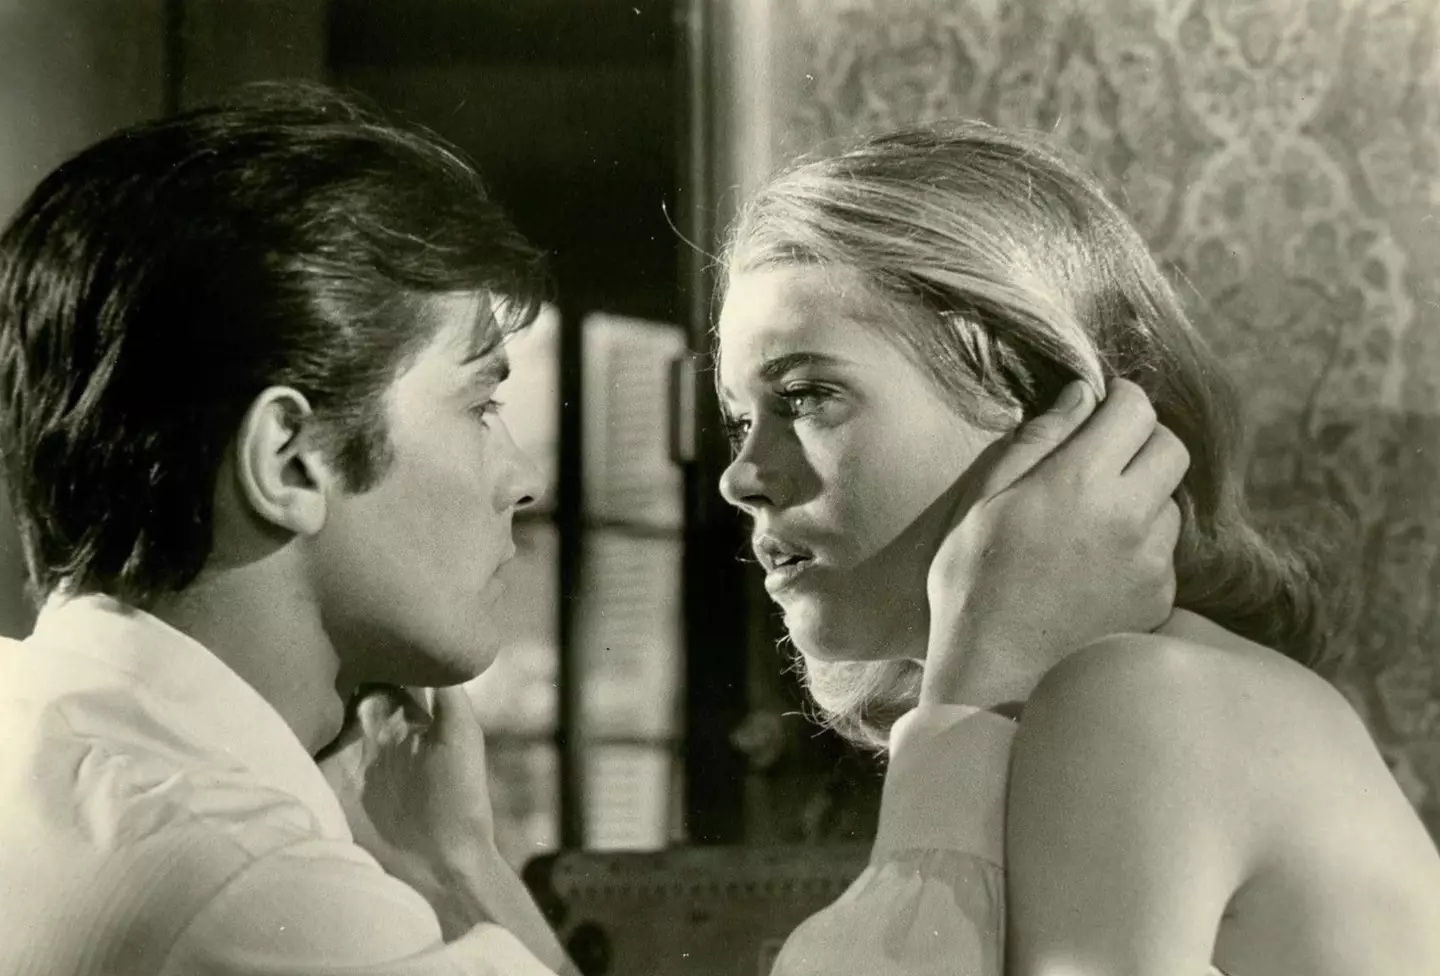 Fonda and Clément worked together on thriller 'Joy House'.